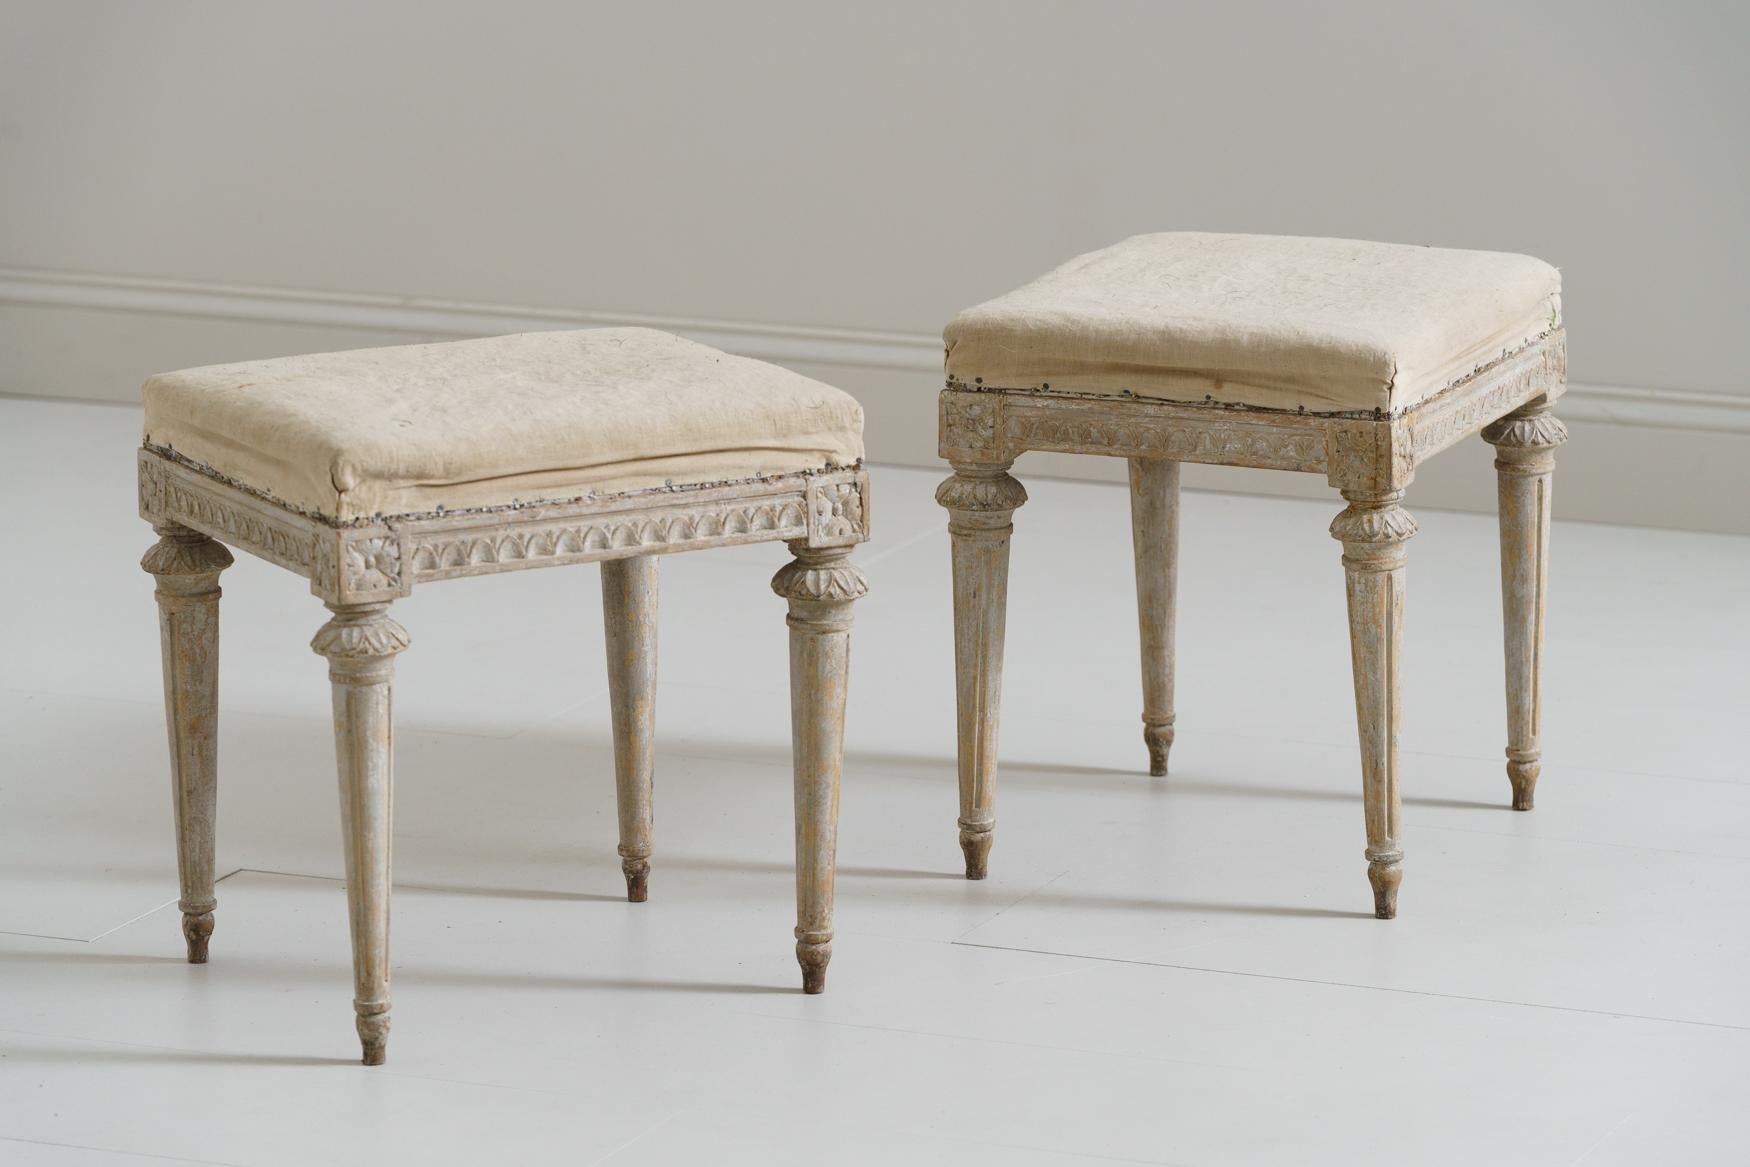 18th Century and Earlier 18th Century Pair of Swedish Gustavian Period Foot Stools or Benches